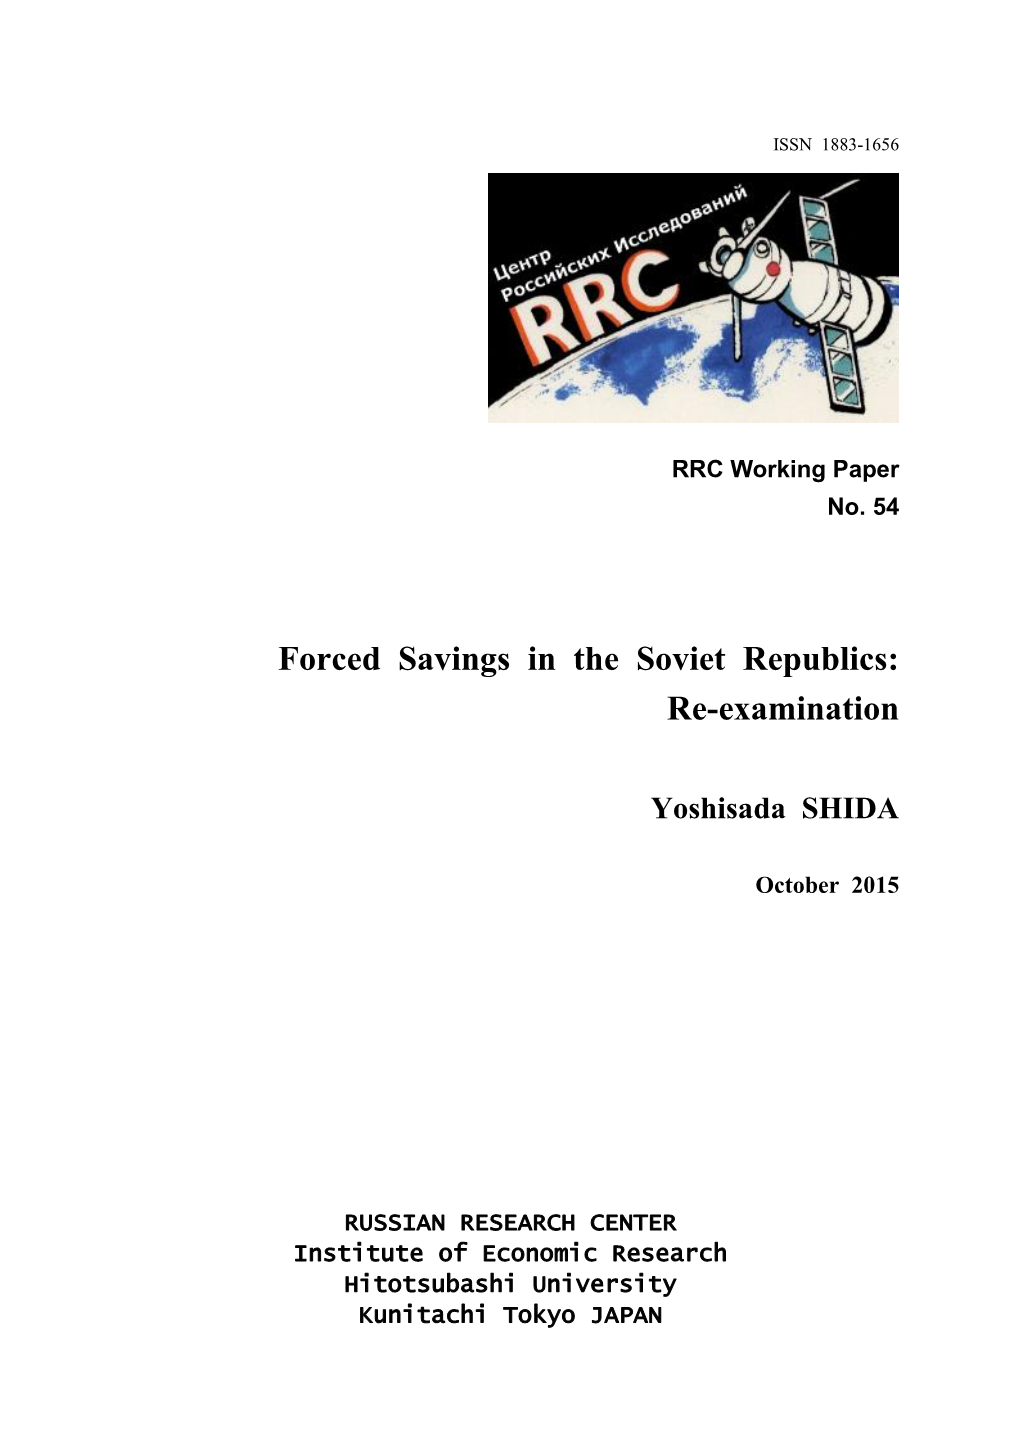 Forced Savings in the Soviet Republics: Re-Examination